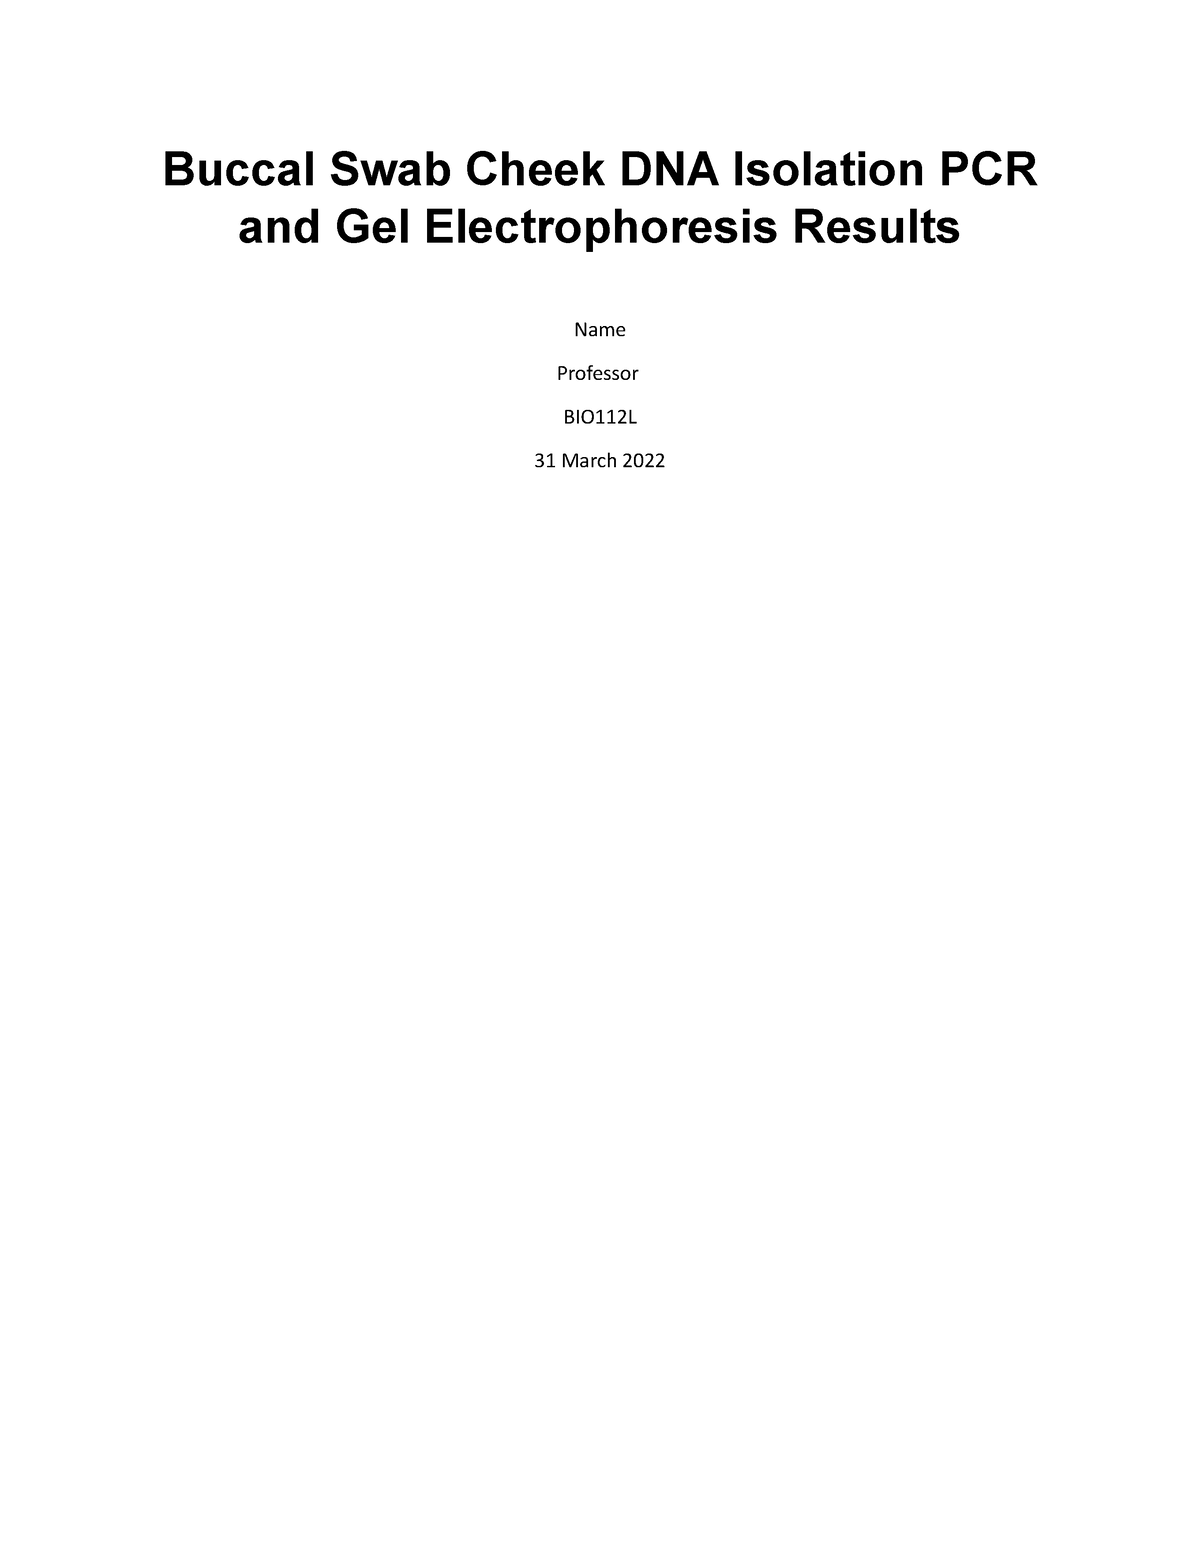 electrophoresis results